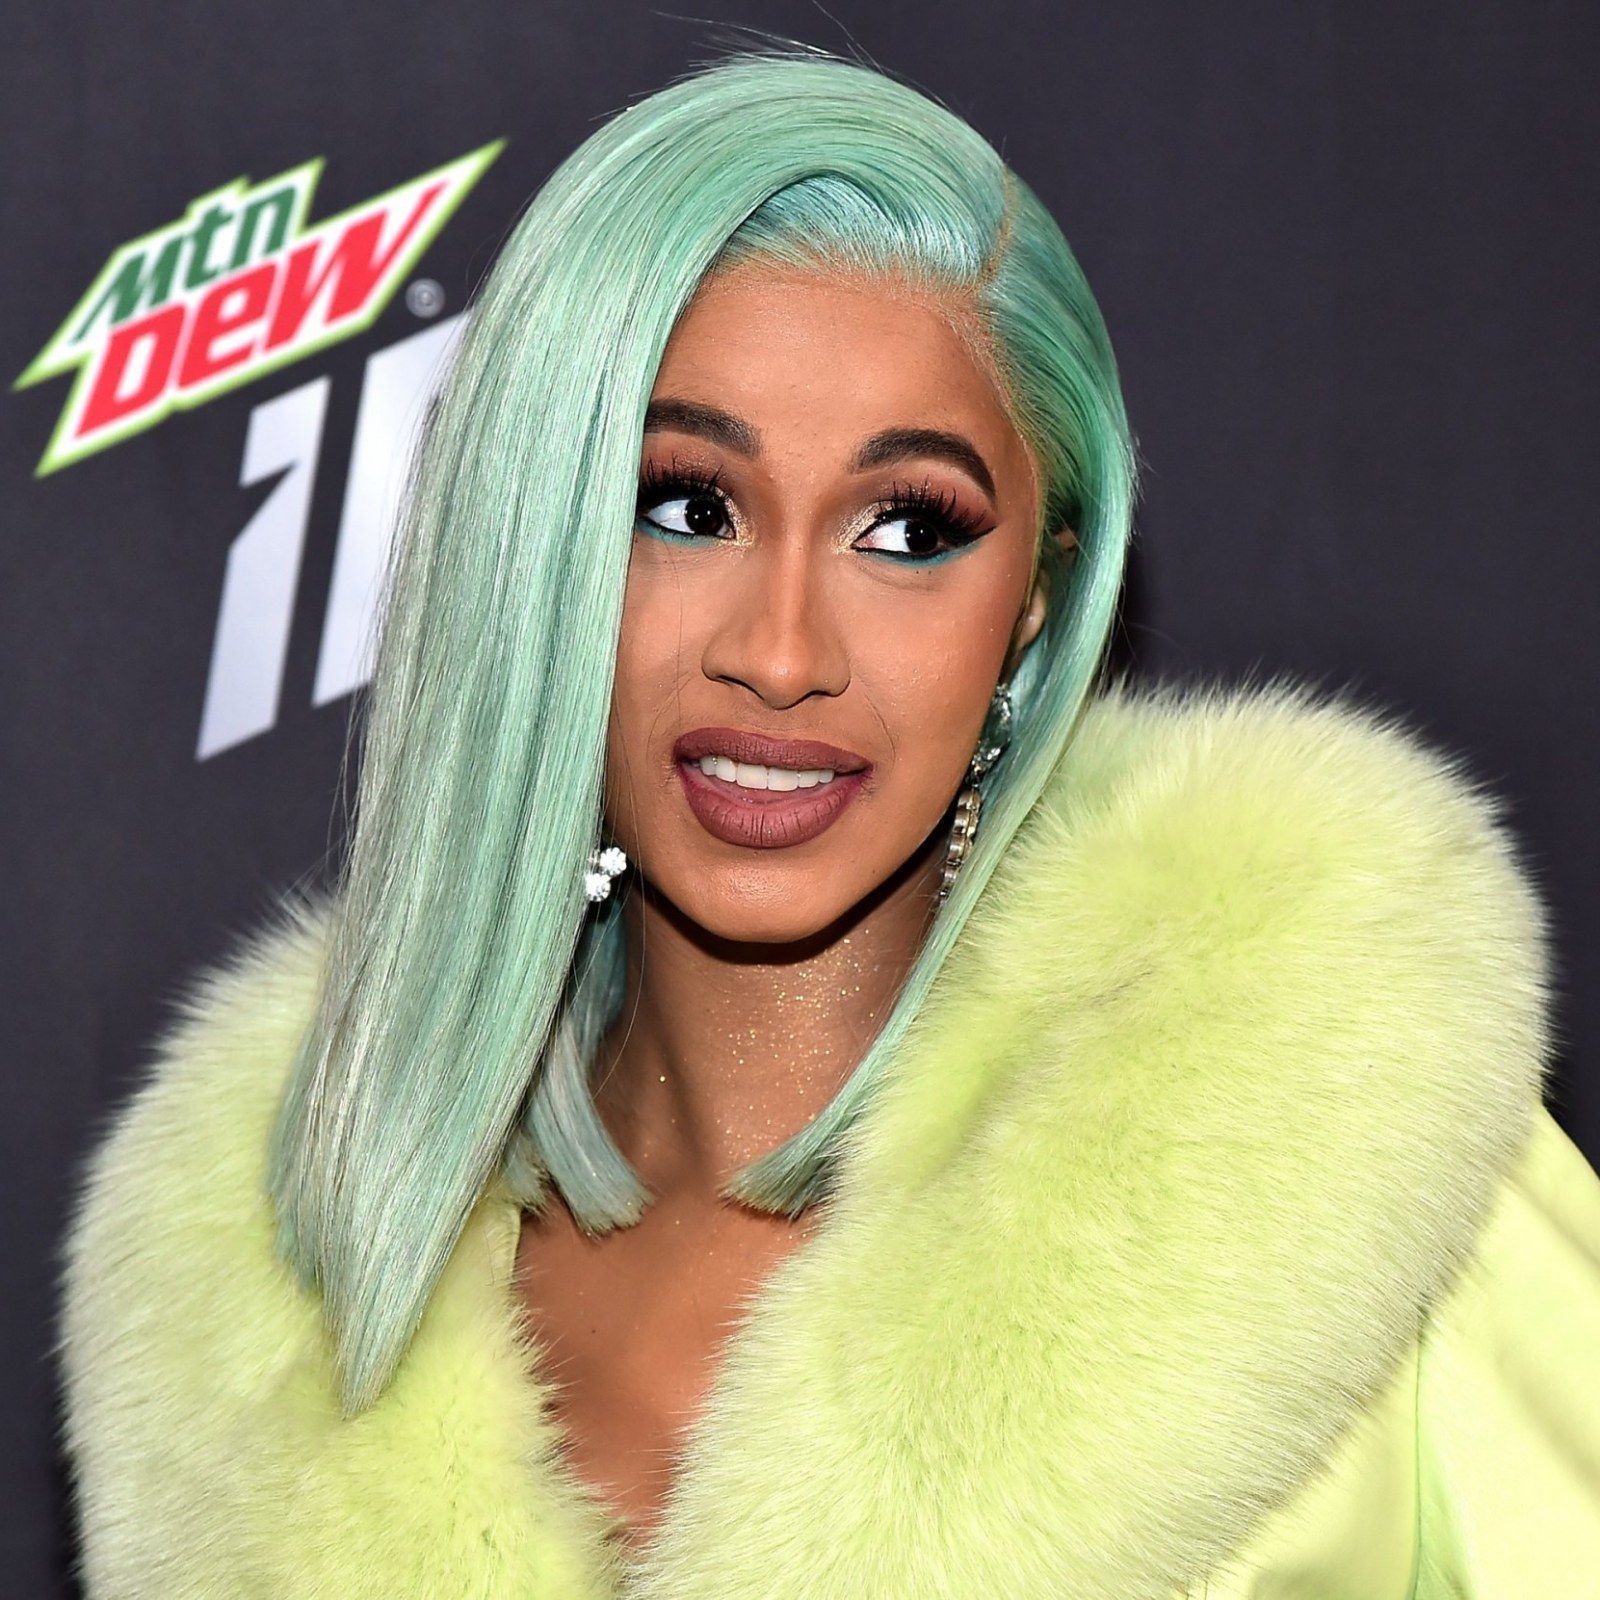 What are Nicki Minaj and Cardi B Fighting About? A Breakdown of Their Feud